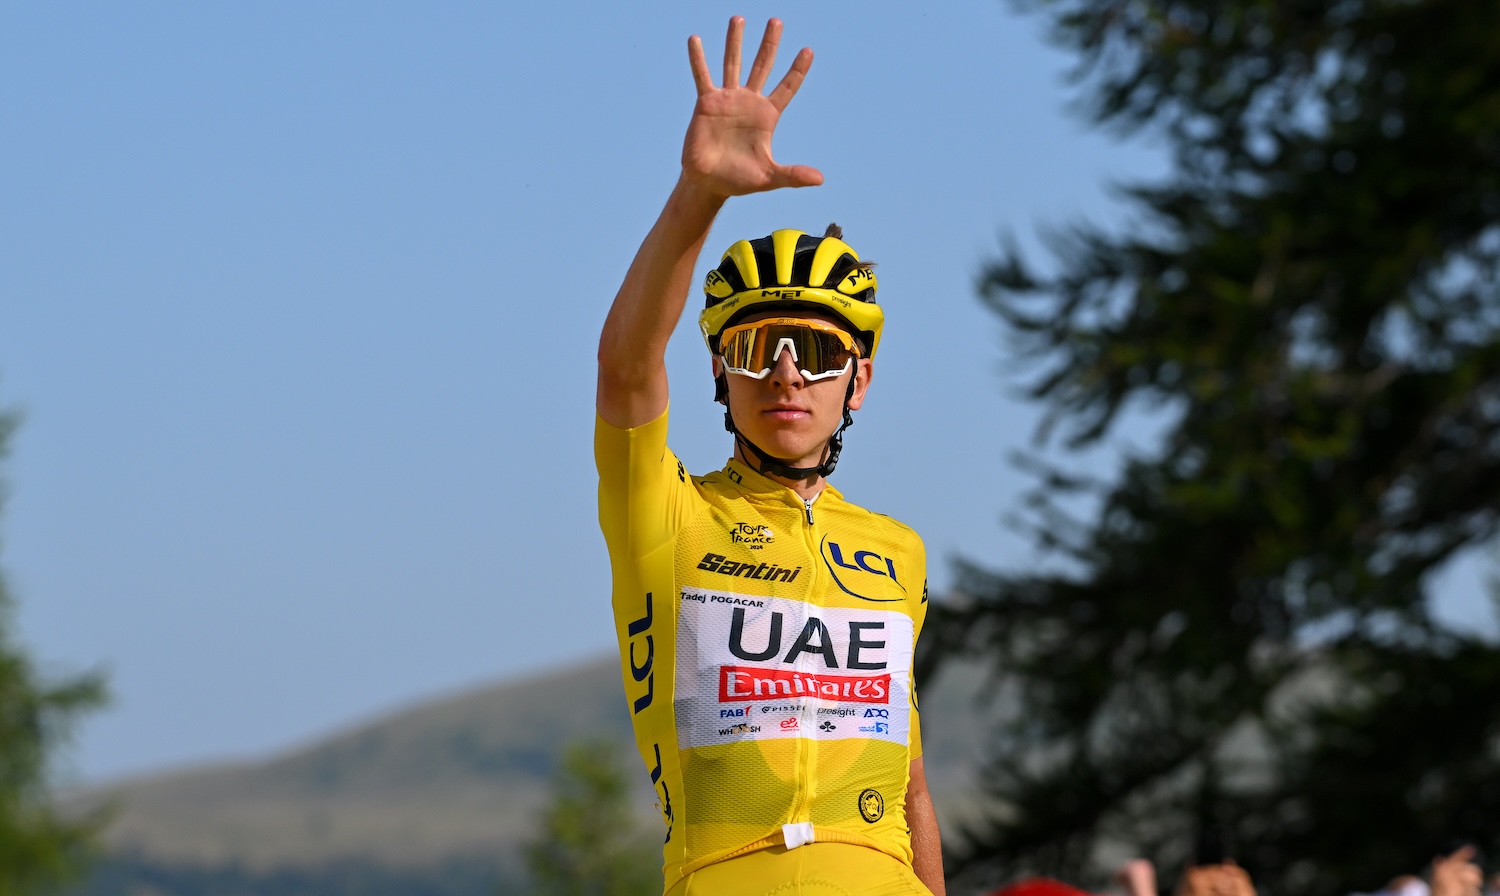 COL DE LA COUILLOLE, FRANCE - JULY 20: Tadej Pogacar of Slovenia and UAE Team Emirates - Yellow Leader Jersey celebrates at finish line as stage winner during the 111th Tour de France 2024, Stage 20 a 132.8km stage from Nice to Col de la Couillole 1676m / #UCIWT / on July 20, 2024 in Col de la Couillole, France. (Photo by Tim de Waele/Getty Images)